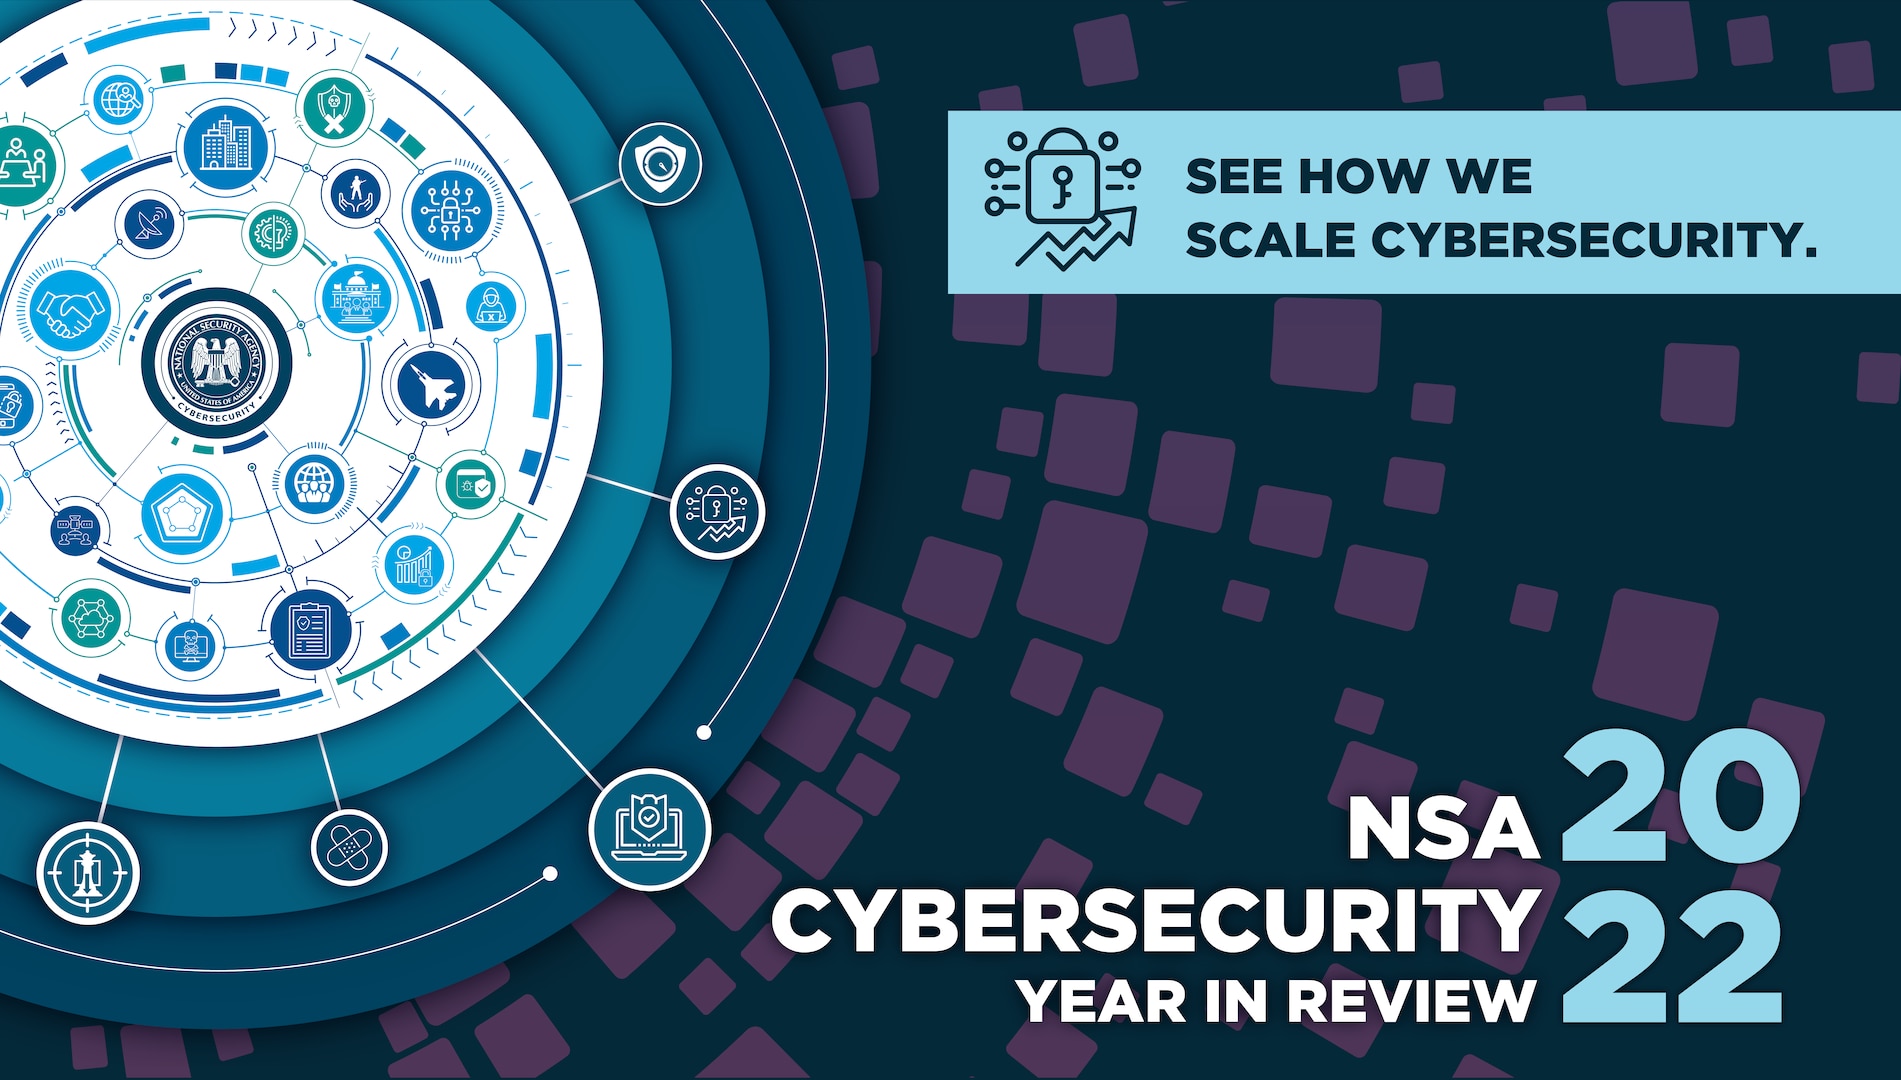 NSA 2022 Cybersecurity Year in Review Graphic. See how we scale Cybersecurity.